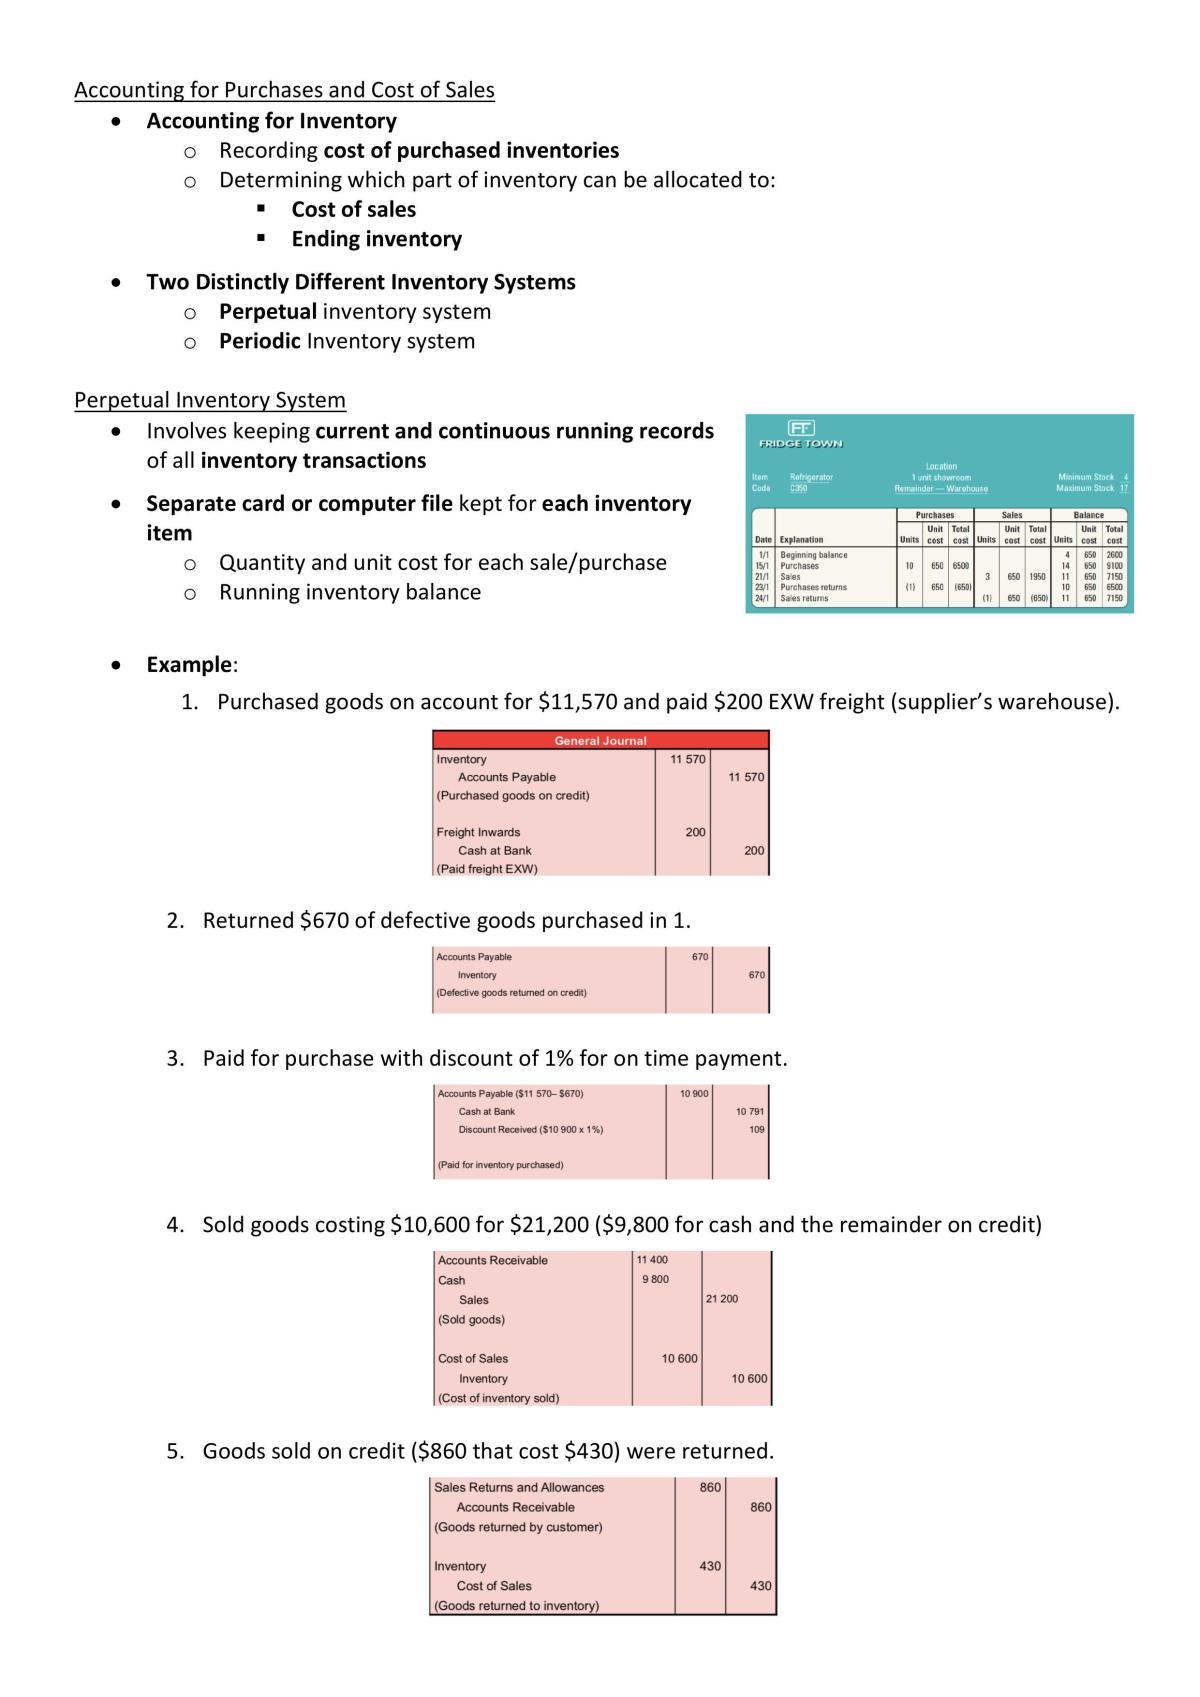 ACCY111 High Distinction (94%) Complete Study Notes - Page 20